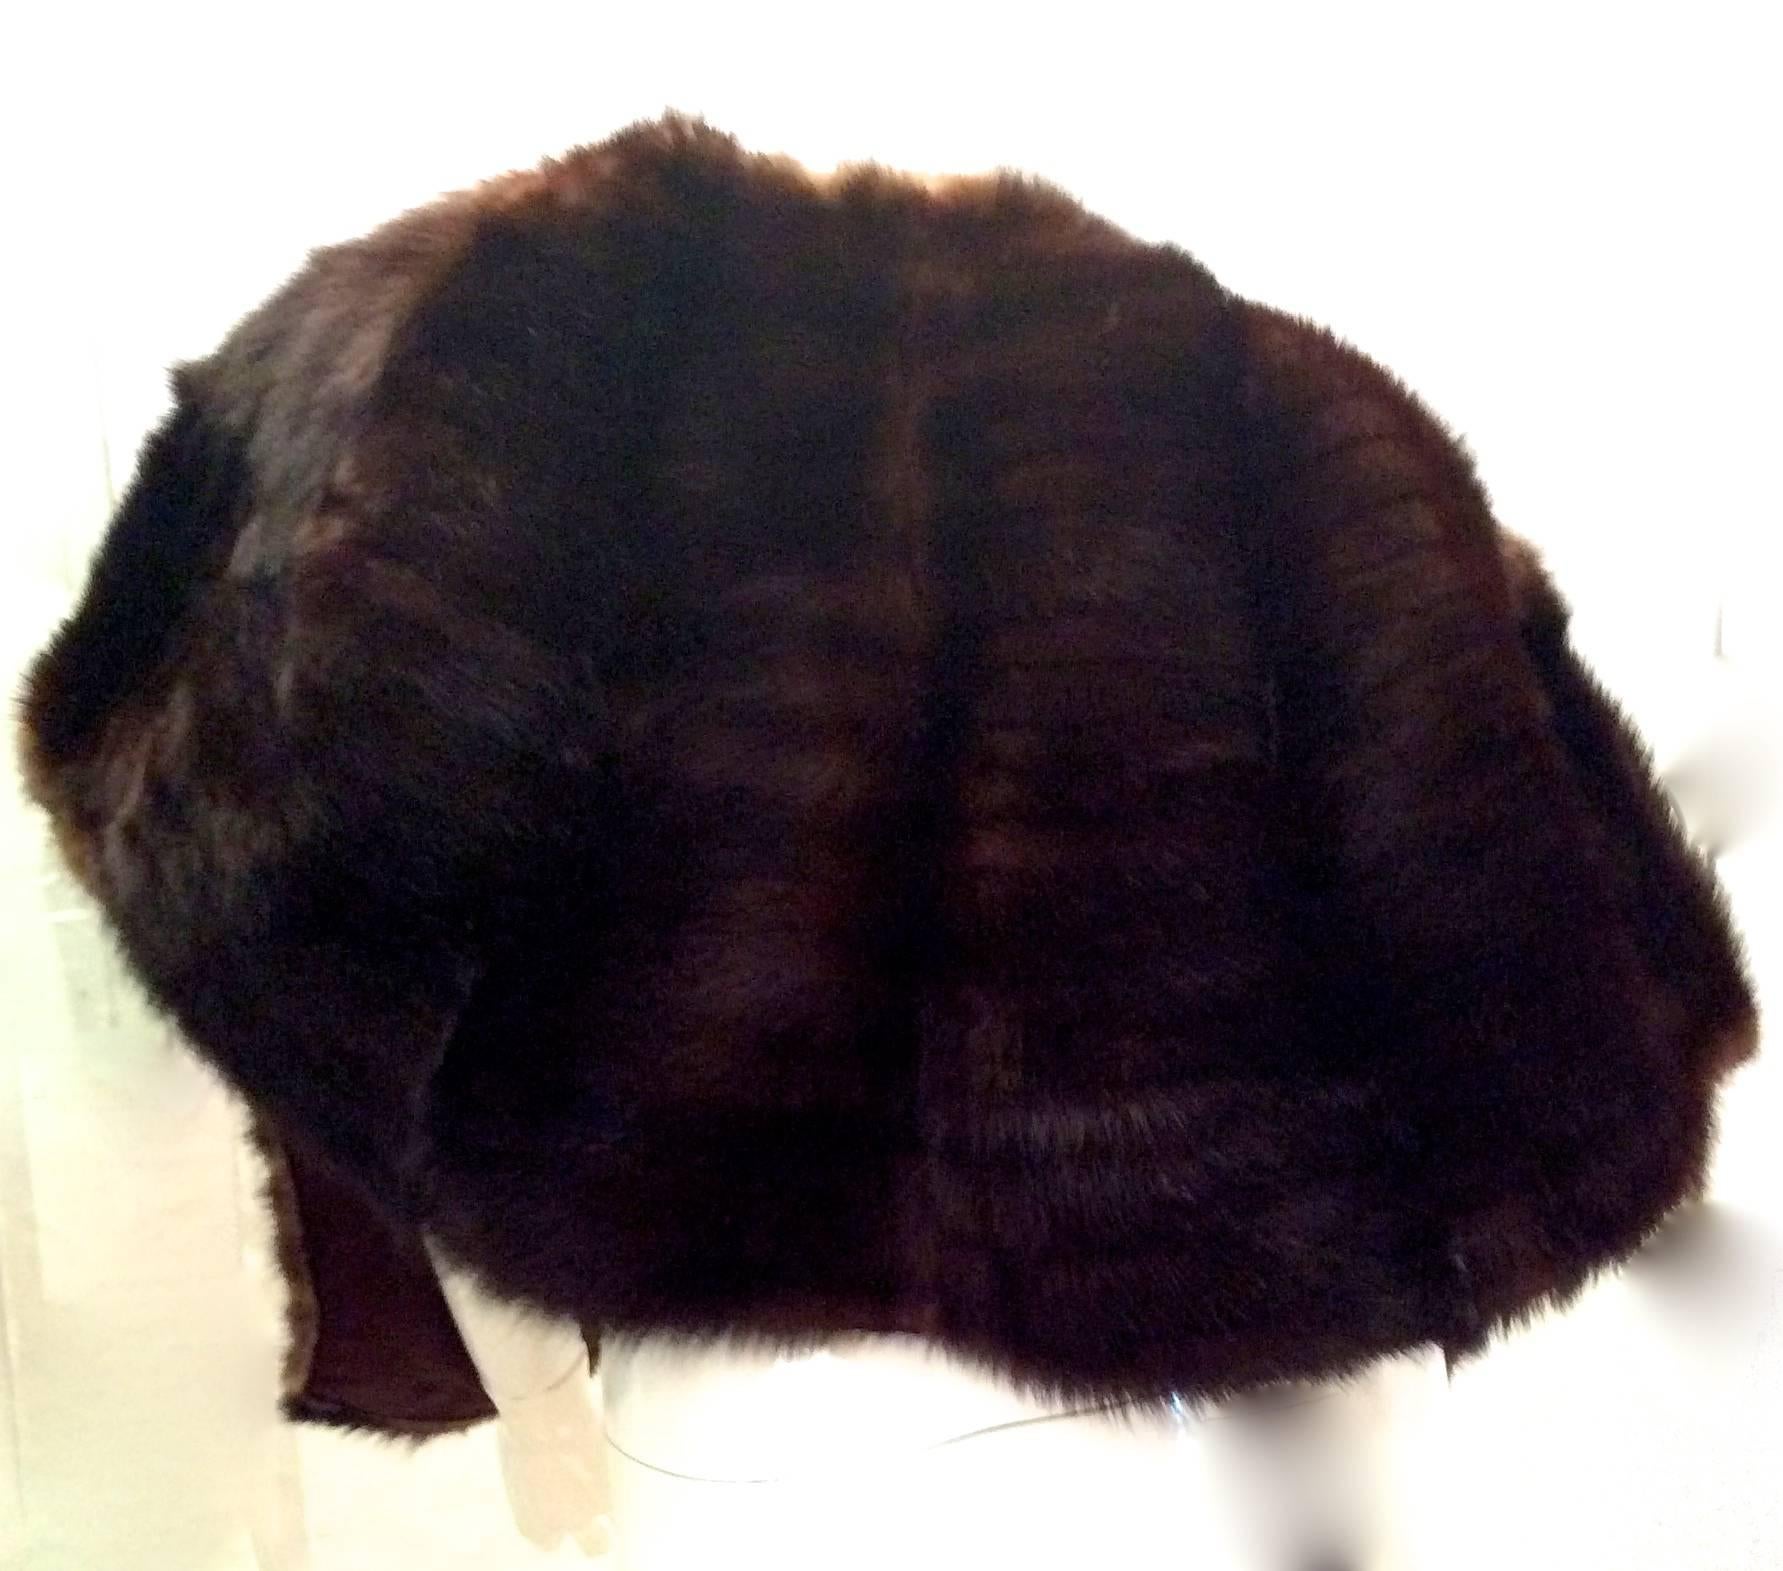 Presented here is a beautiful dark brown mink shawl in excellent condition. It wraps around the shoulders and has two front invisible pockets which makes it perfect for that chilly night or that black tie event. The measurement from the back of the